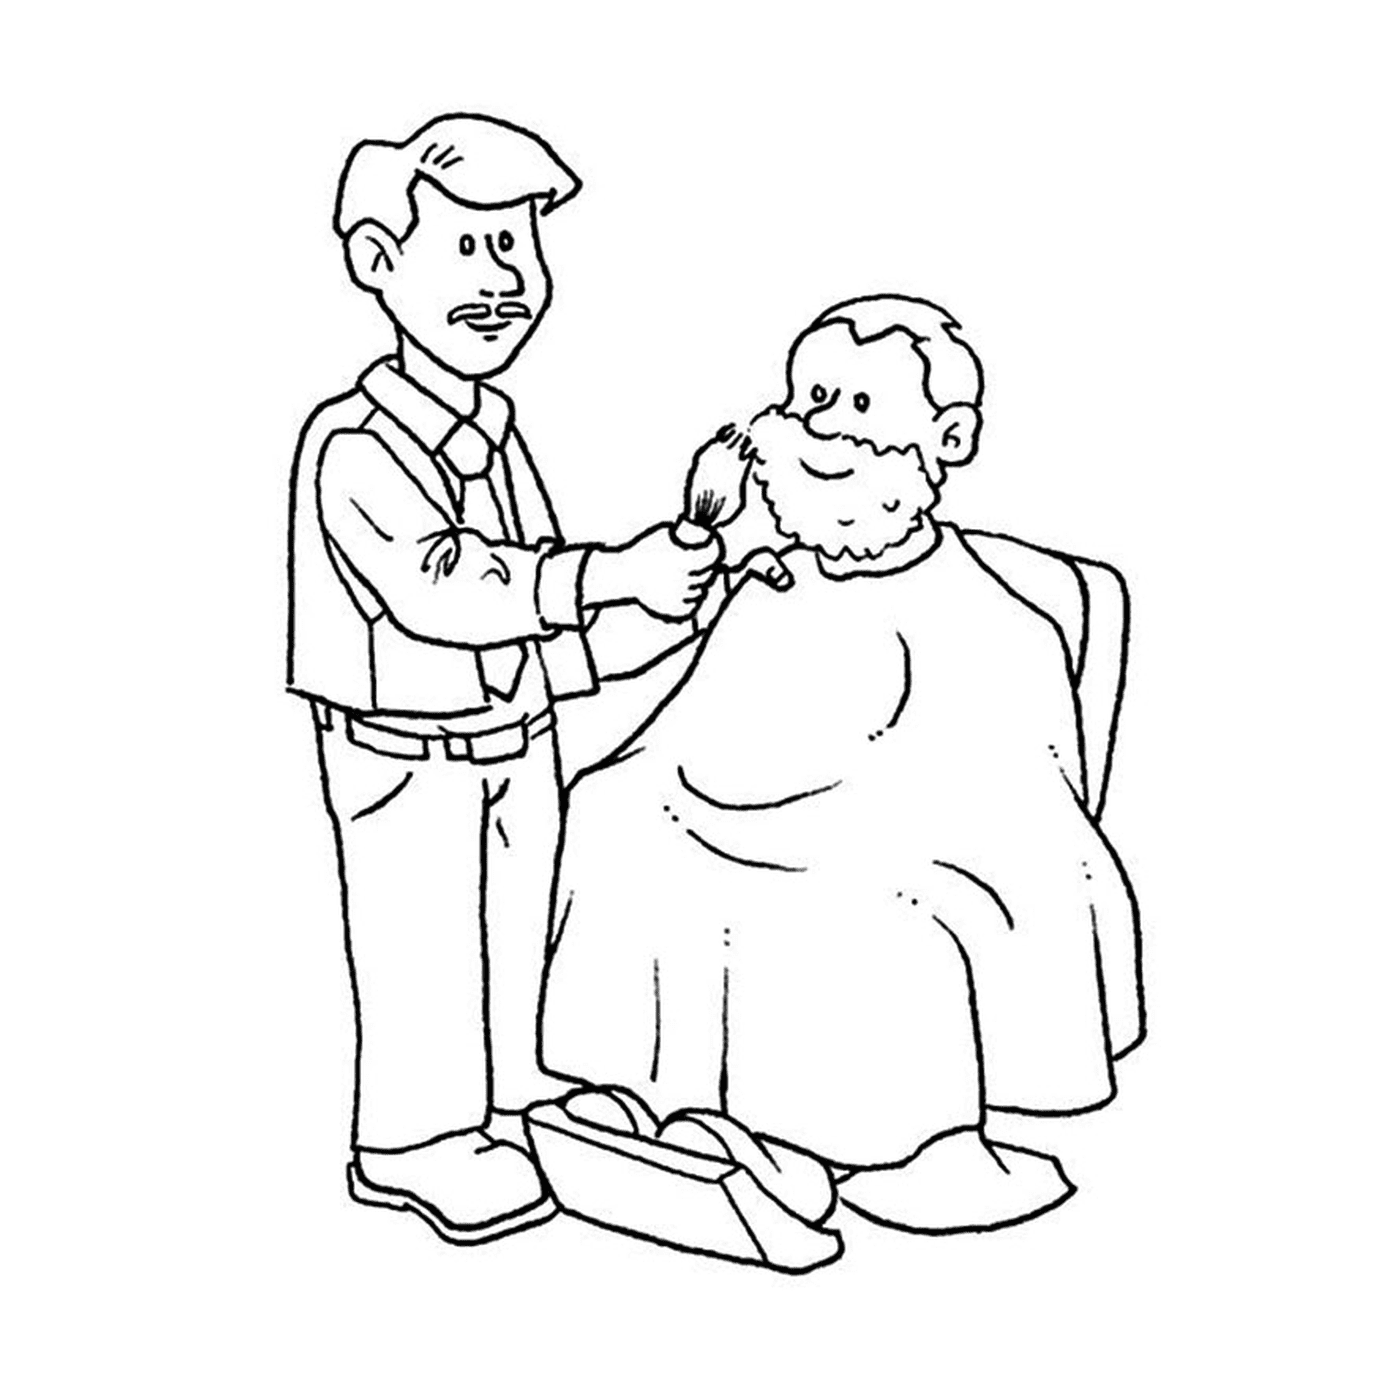  Barbier with an old man getting his hair cut by a barber 